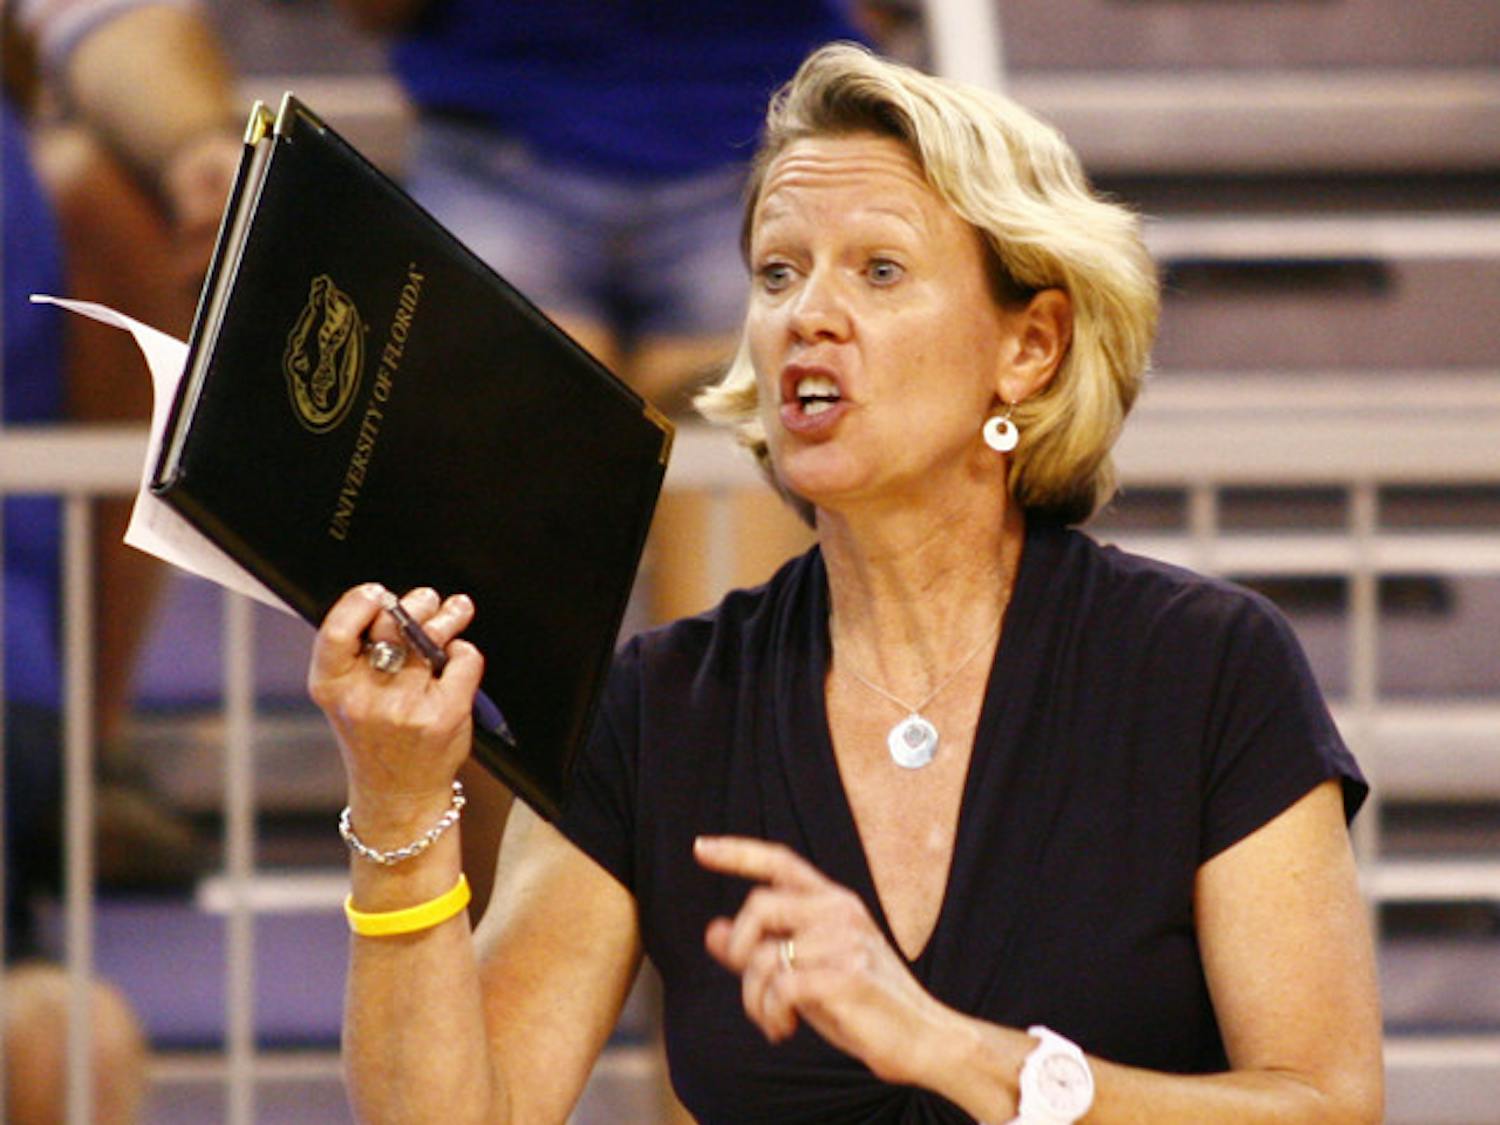 UF coach Mary Wise (above) will square off against former Gator and current LIU-Brooklyn assistant coach Jennifer Robinson when both teams play tonight at 7:30.